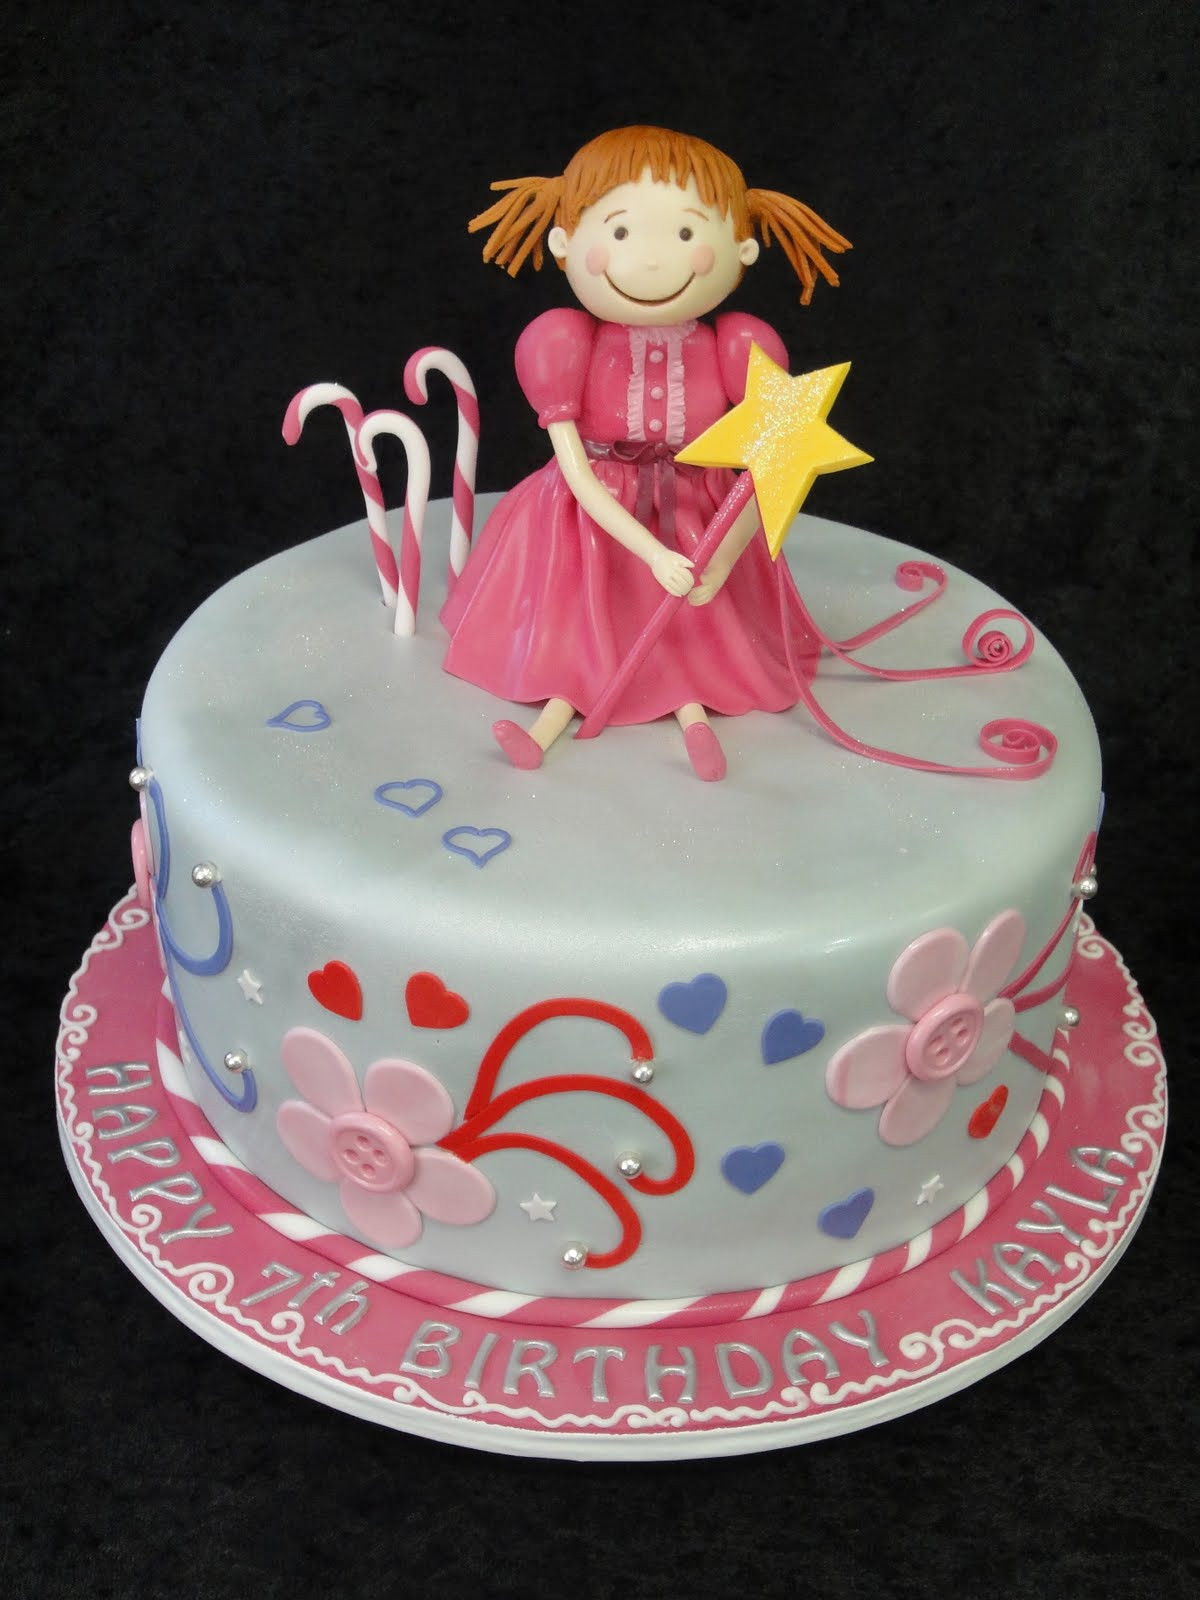 Free Pictures Of Birthday Cakes
 Cake Blog Because Every Cake has a Story Fun Birthday Cakes